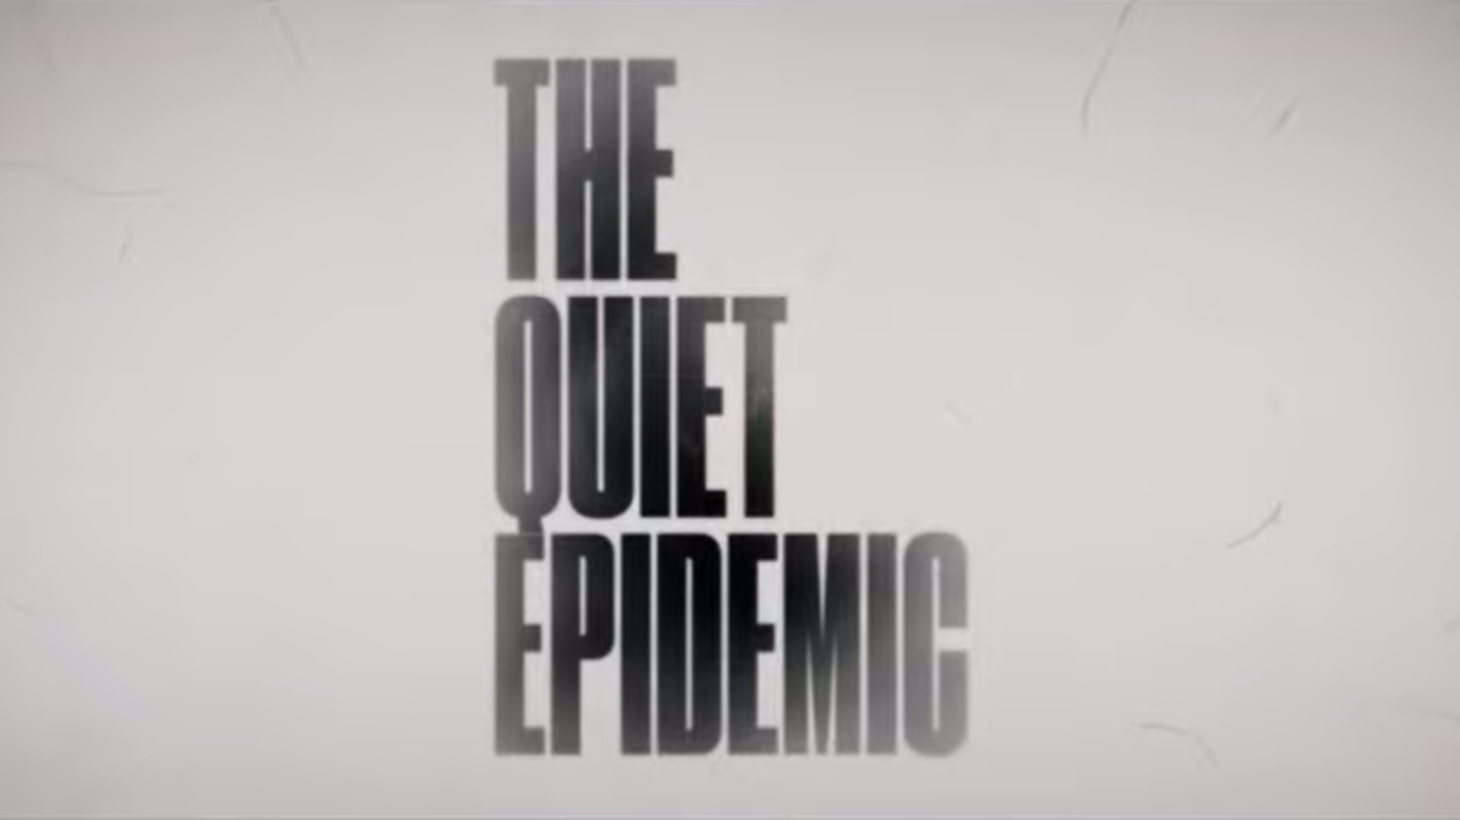 “The Quiet Epidemic” is directed by Lindsay Keys and edited by Winslow Crane-Murdoch.